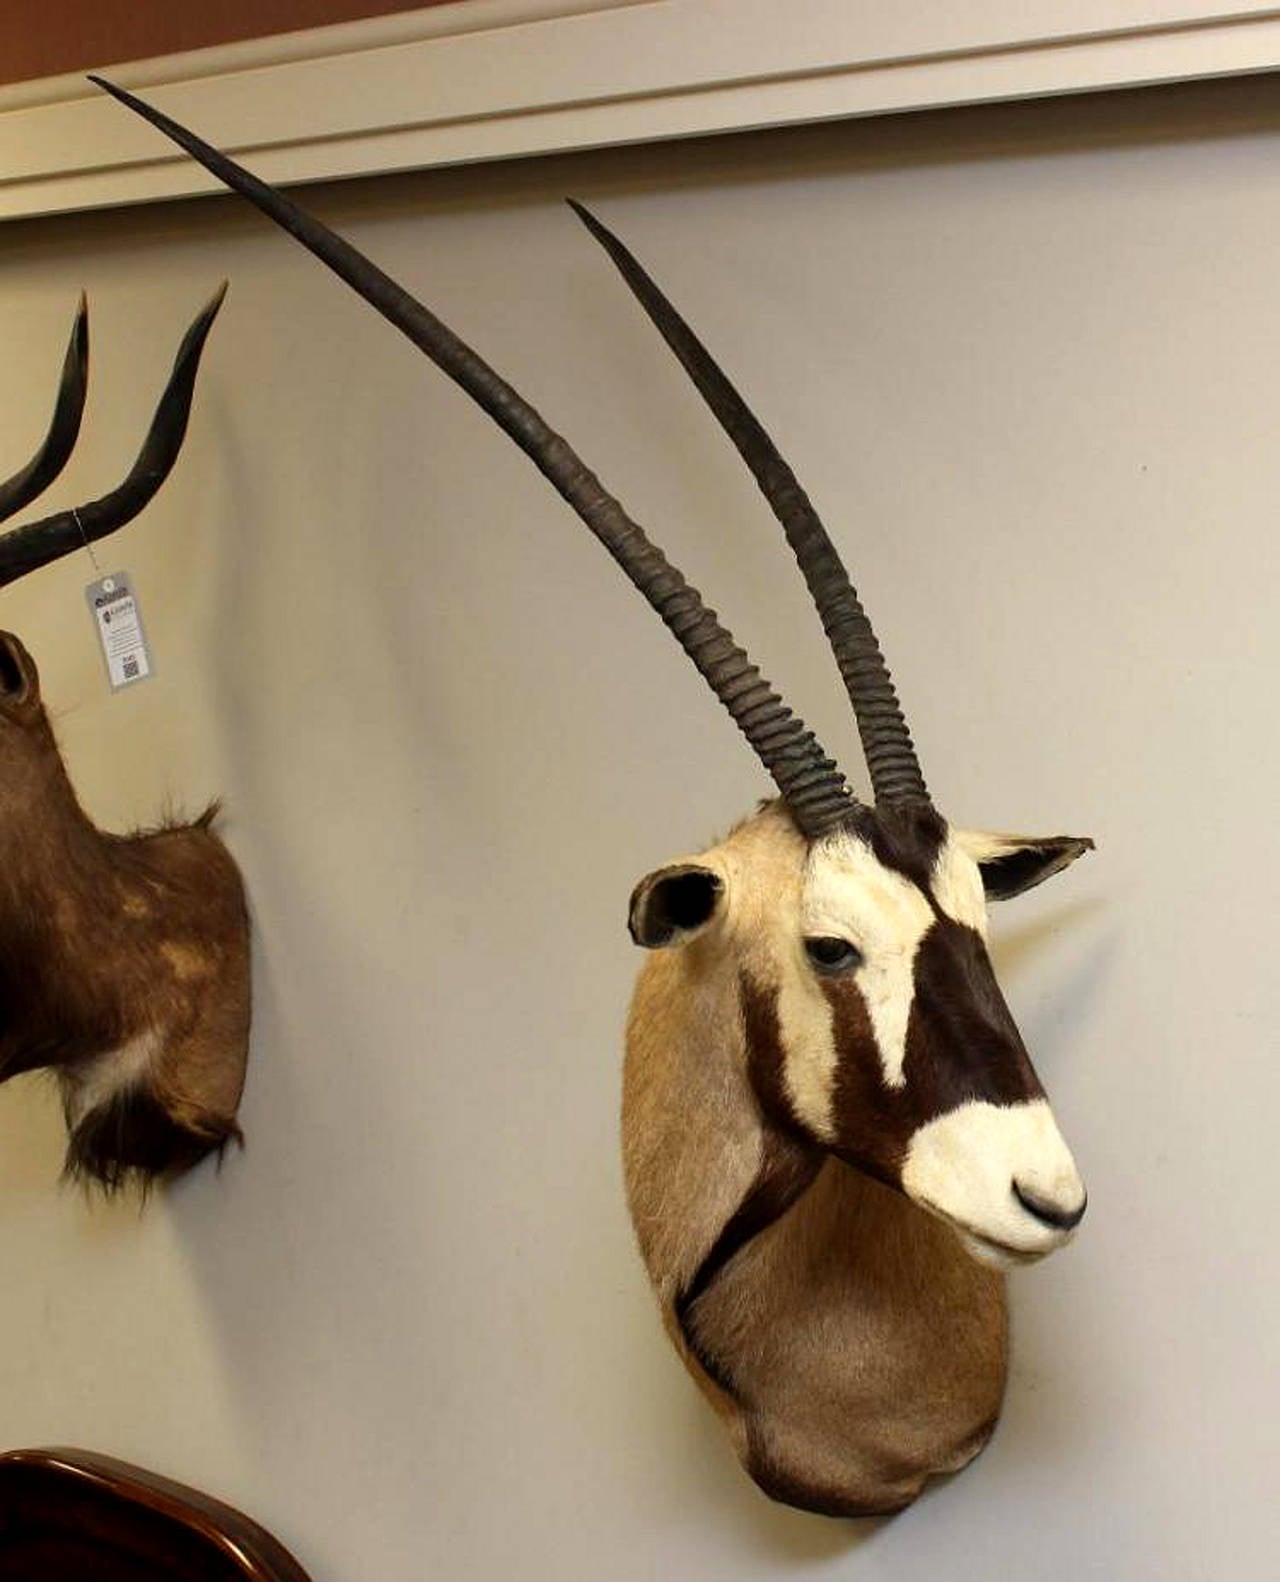 This is a great African Gemsbok taxidermy shoulder mount. It is posed with the head in a semi-upright position looking to the animal's left side out into the room. This mount features an incredible great set of horns, exceeding the level required